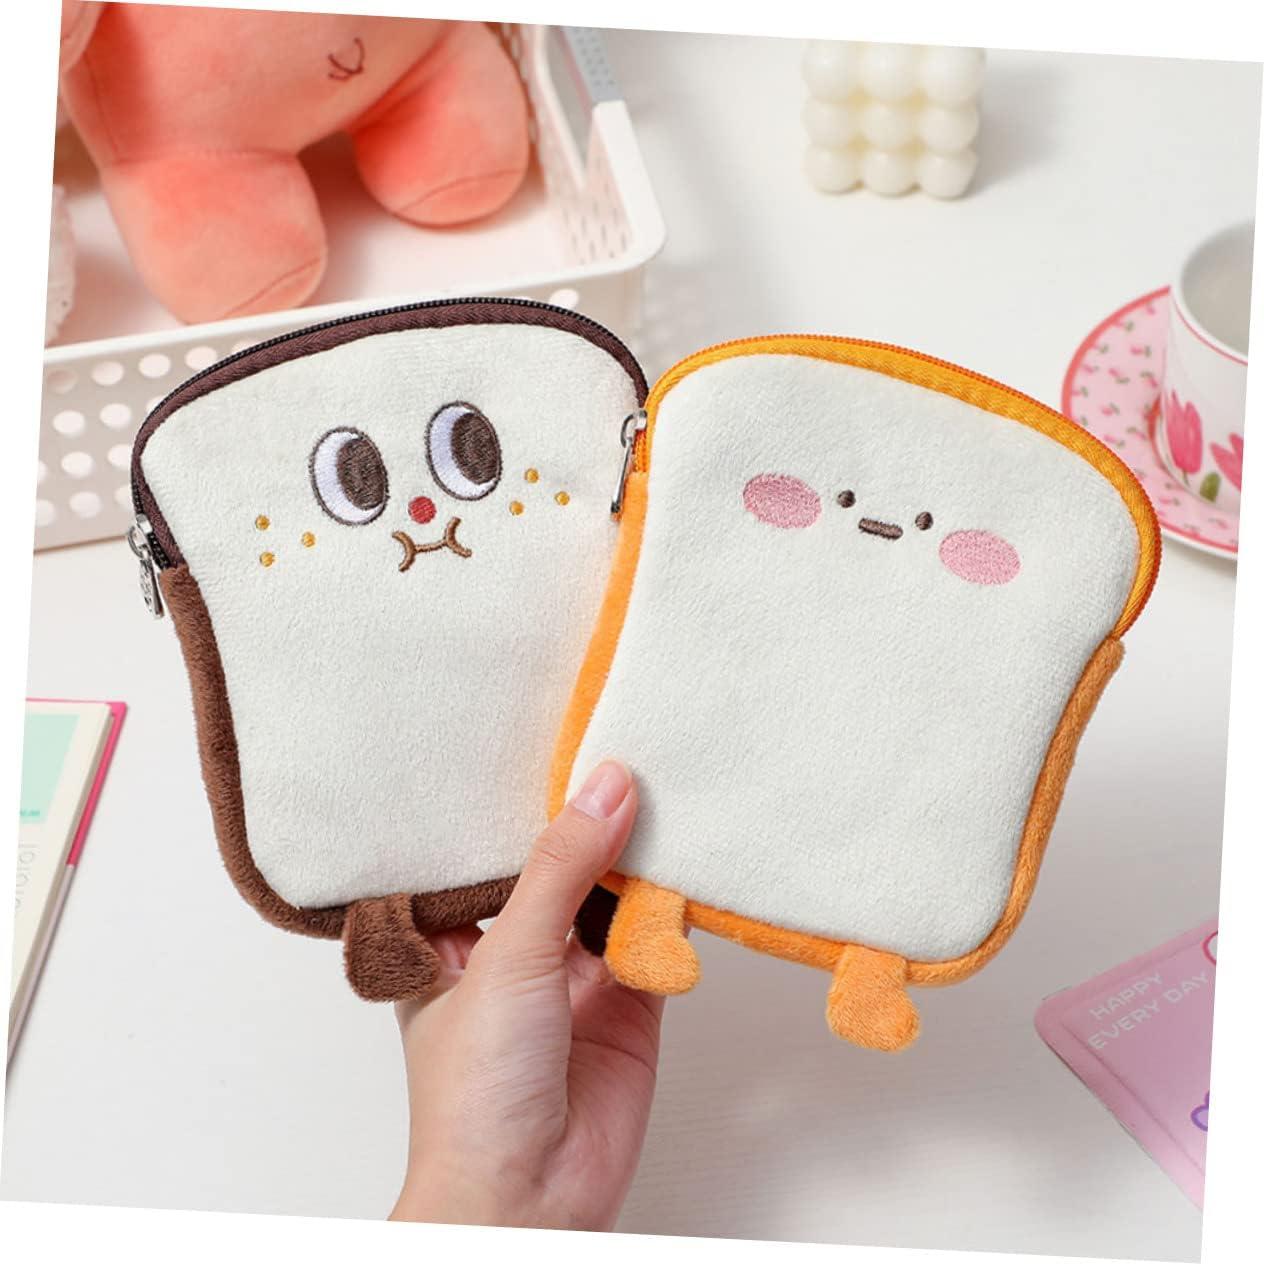 HEALLILY 2pcs Aunt's Towel Storage Bag Tampon Pad Pouch Menstrual Period Bag  Sanitary Napkin Storage Bag Miniture Decoration Purse for Travel for Women  Coin Purses Sanitary Pads Pouch Miss